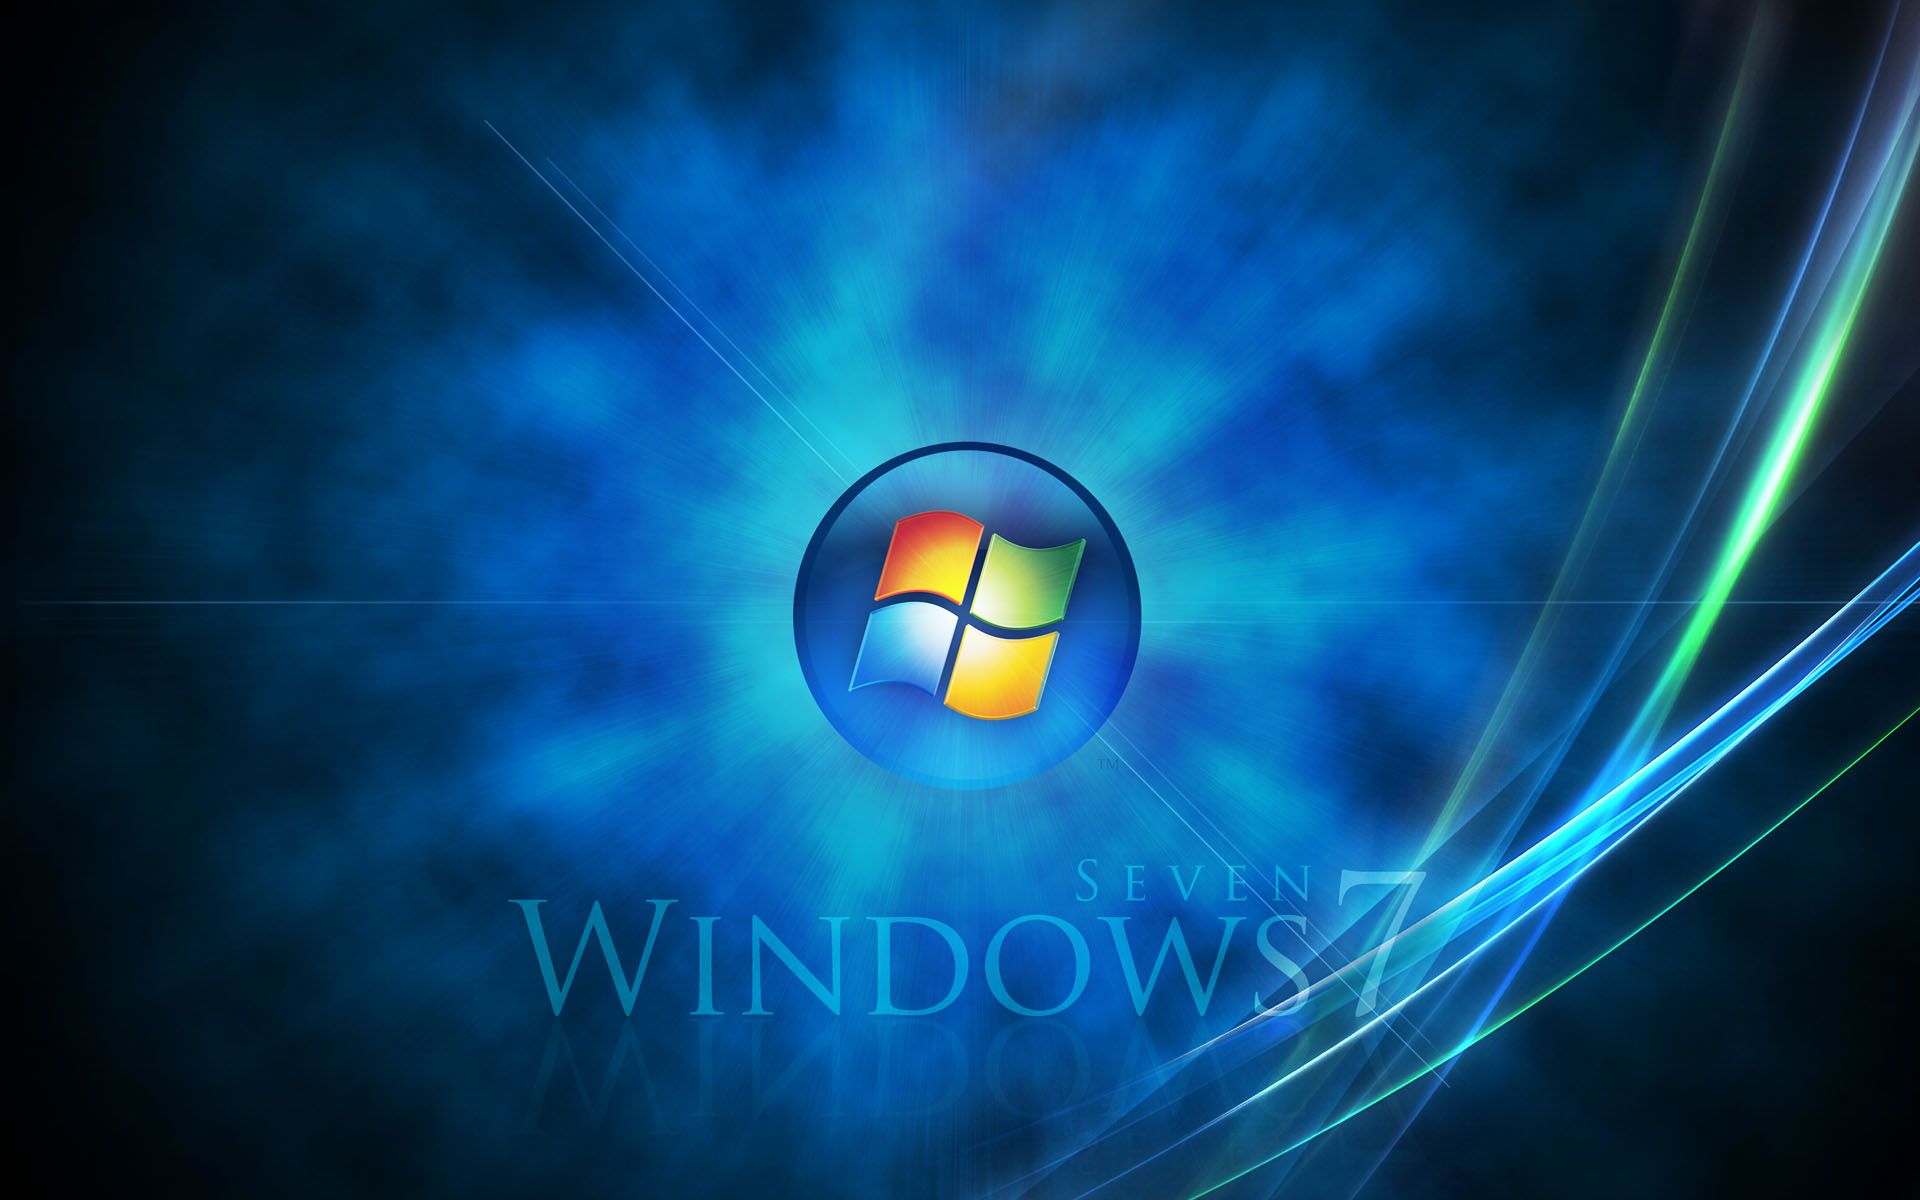 Windows 7 - photo wallpapers, pictures for Windows 7 /